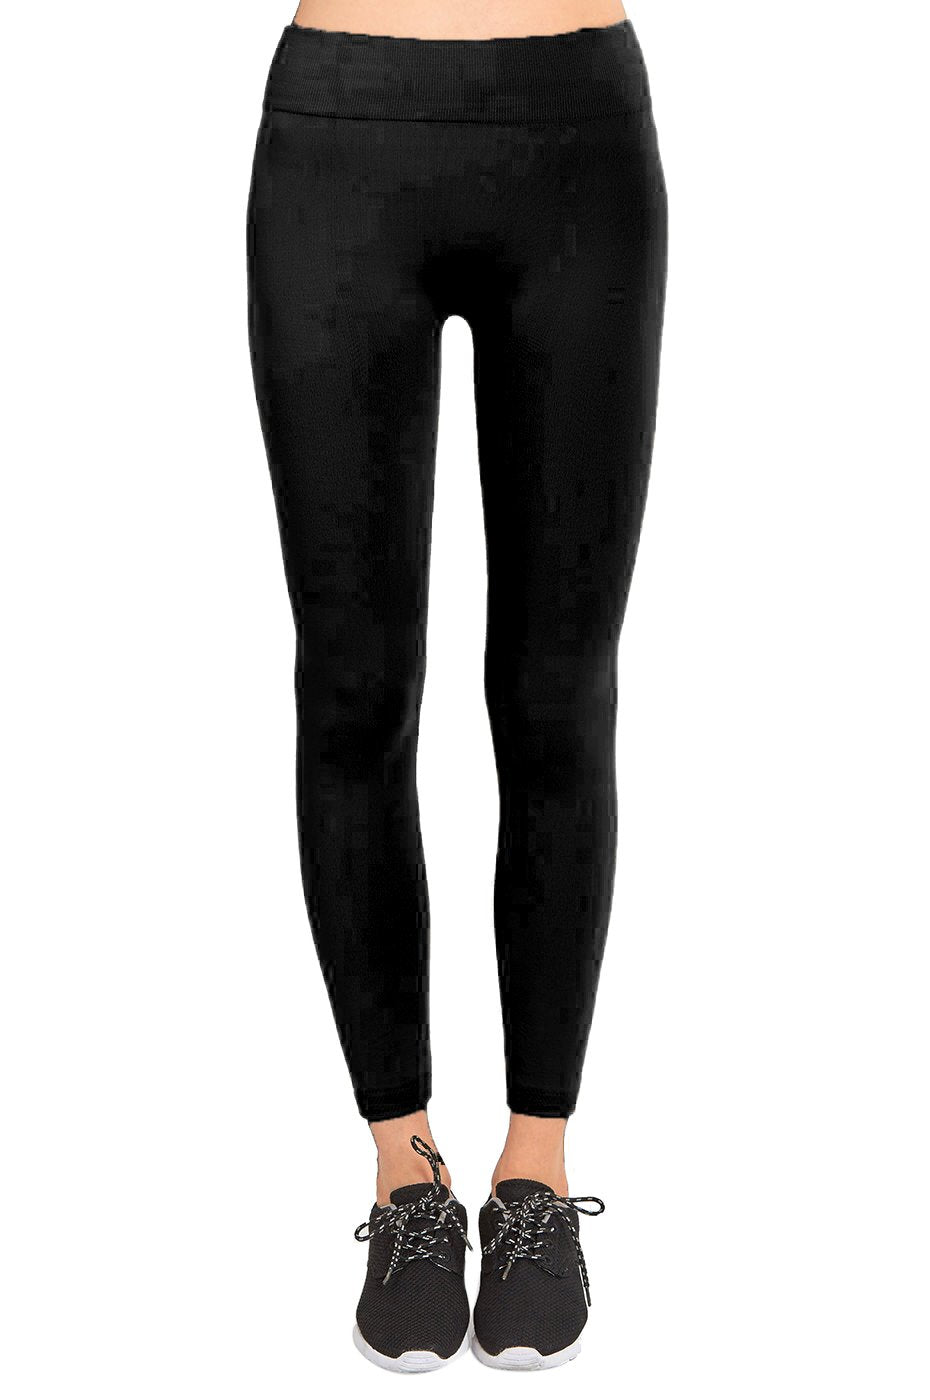 Warm Skinny Sweatpants for Women (Faux Fur Lined) comes in Many